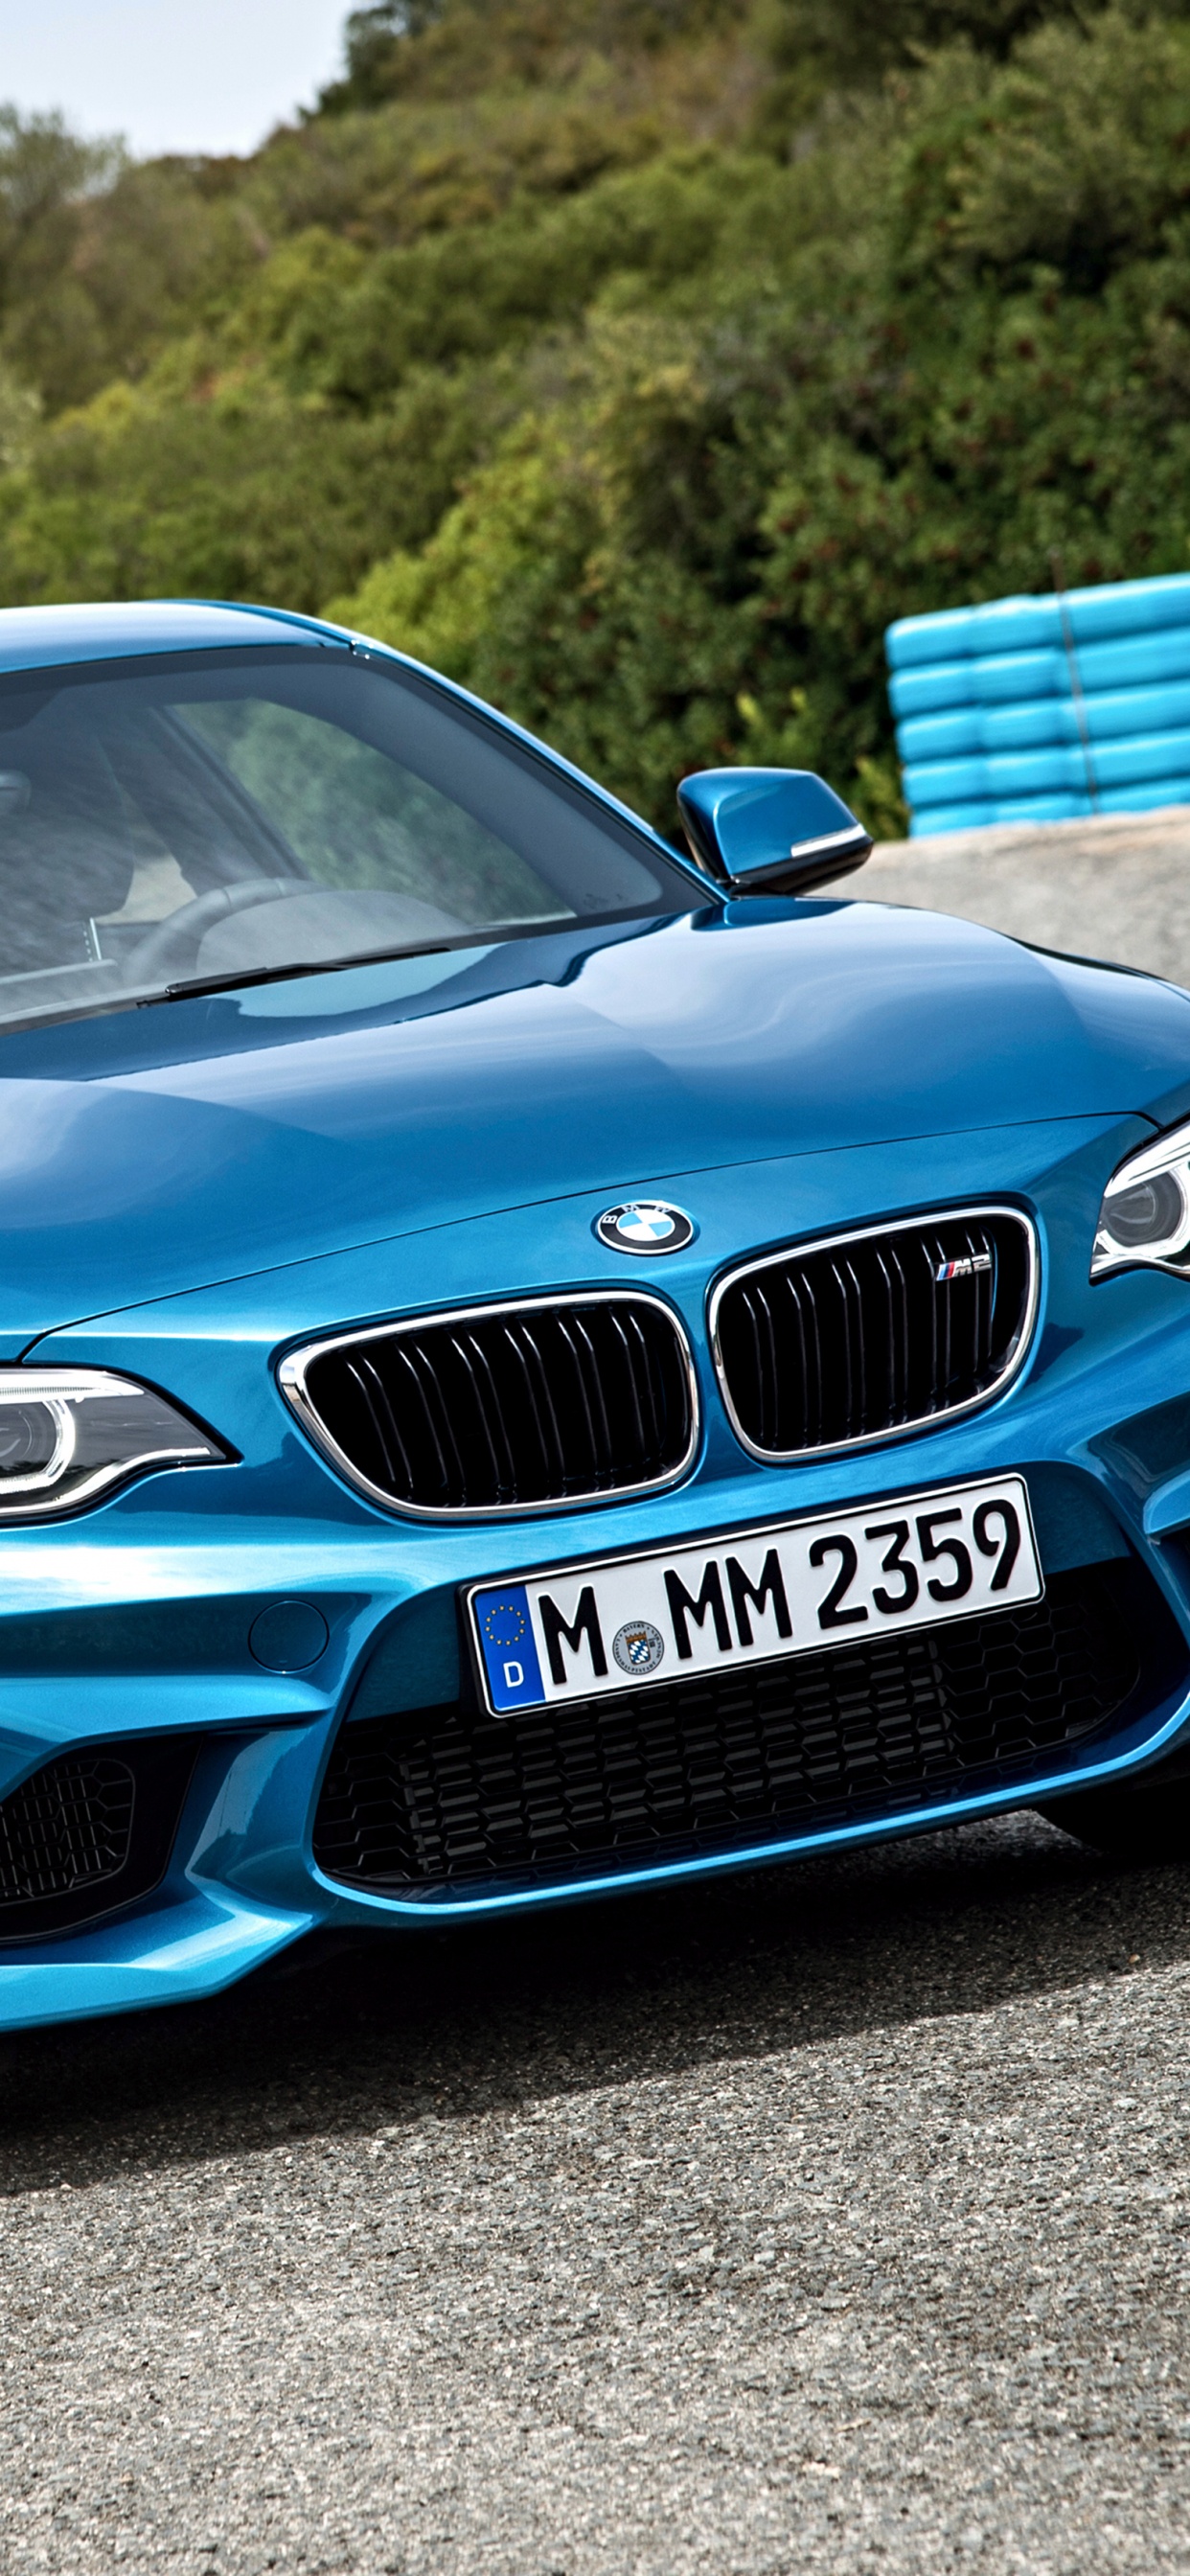 Blue Bmw m 3 on Road During Daytime. Wallpaper in 1242x2688 Resolution